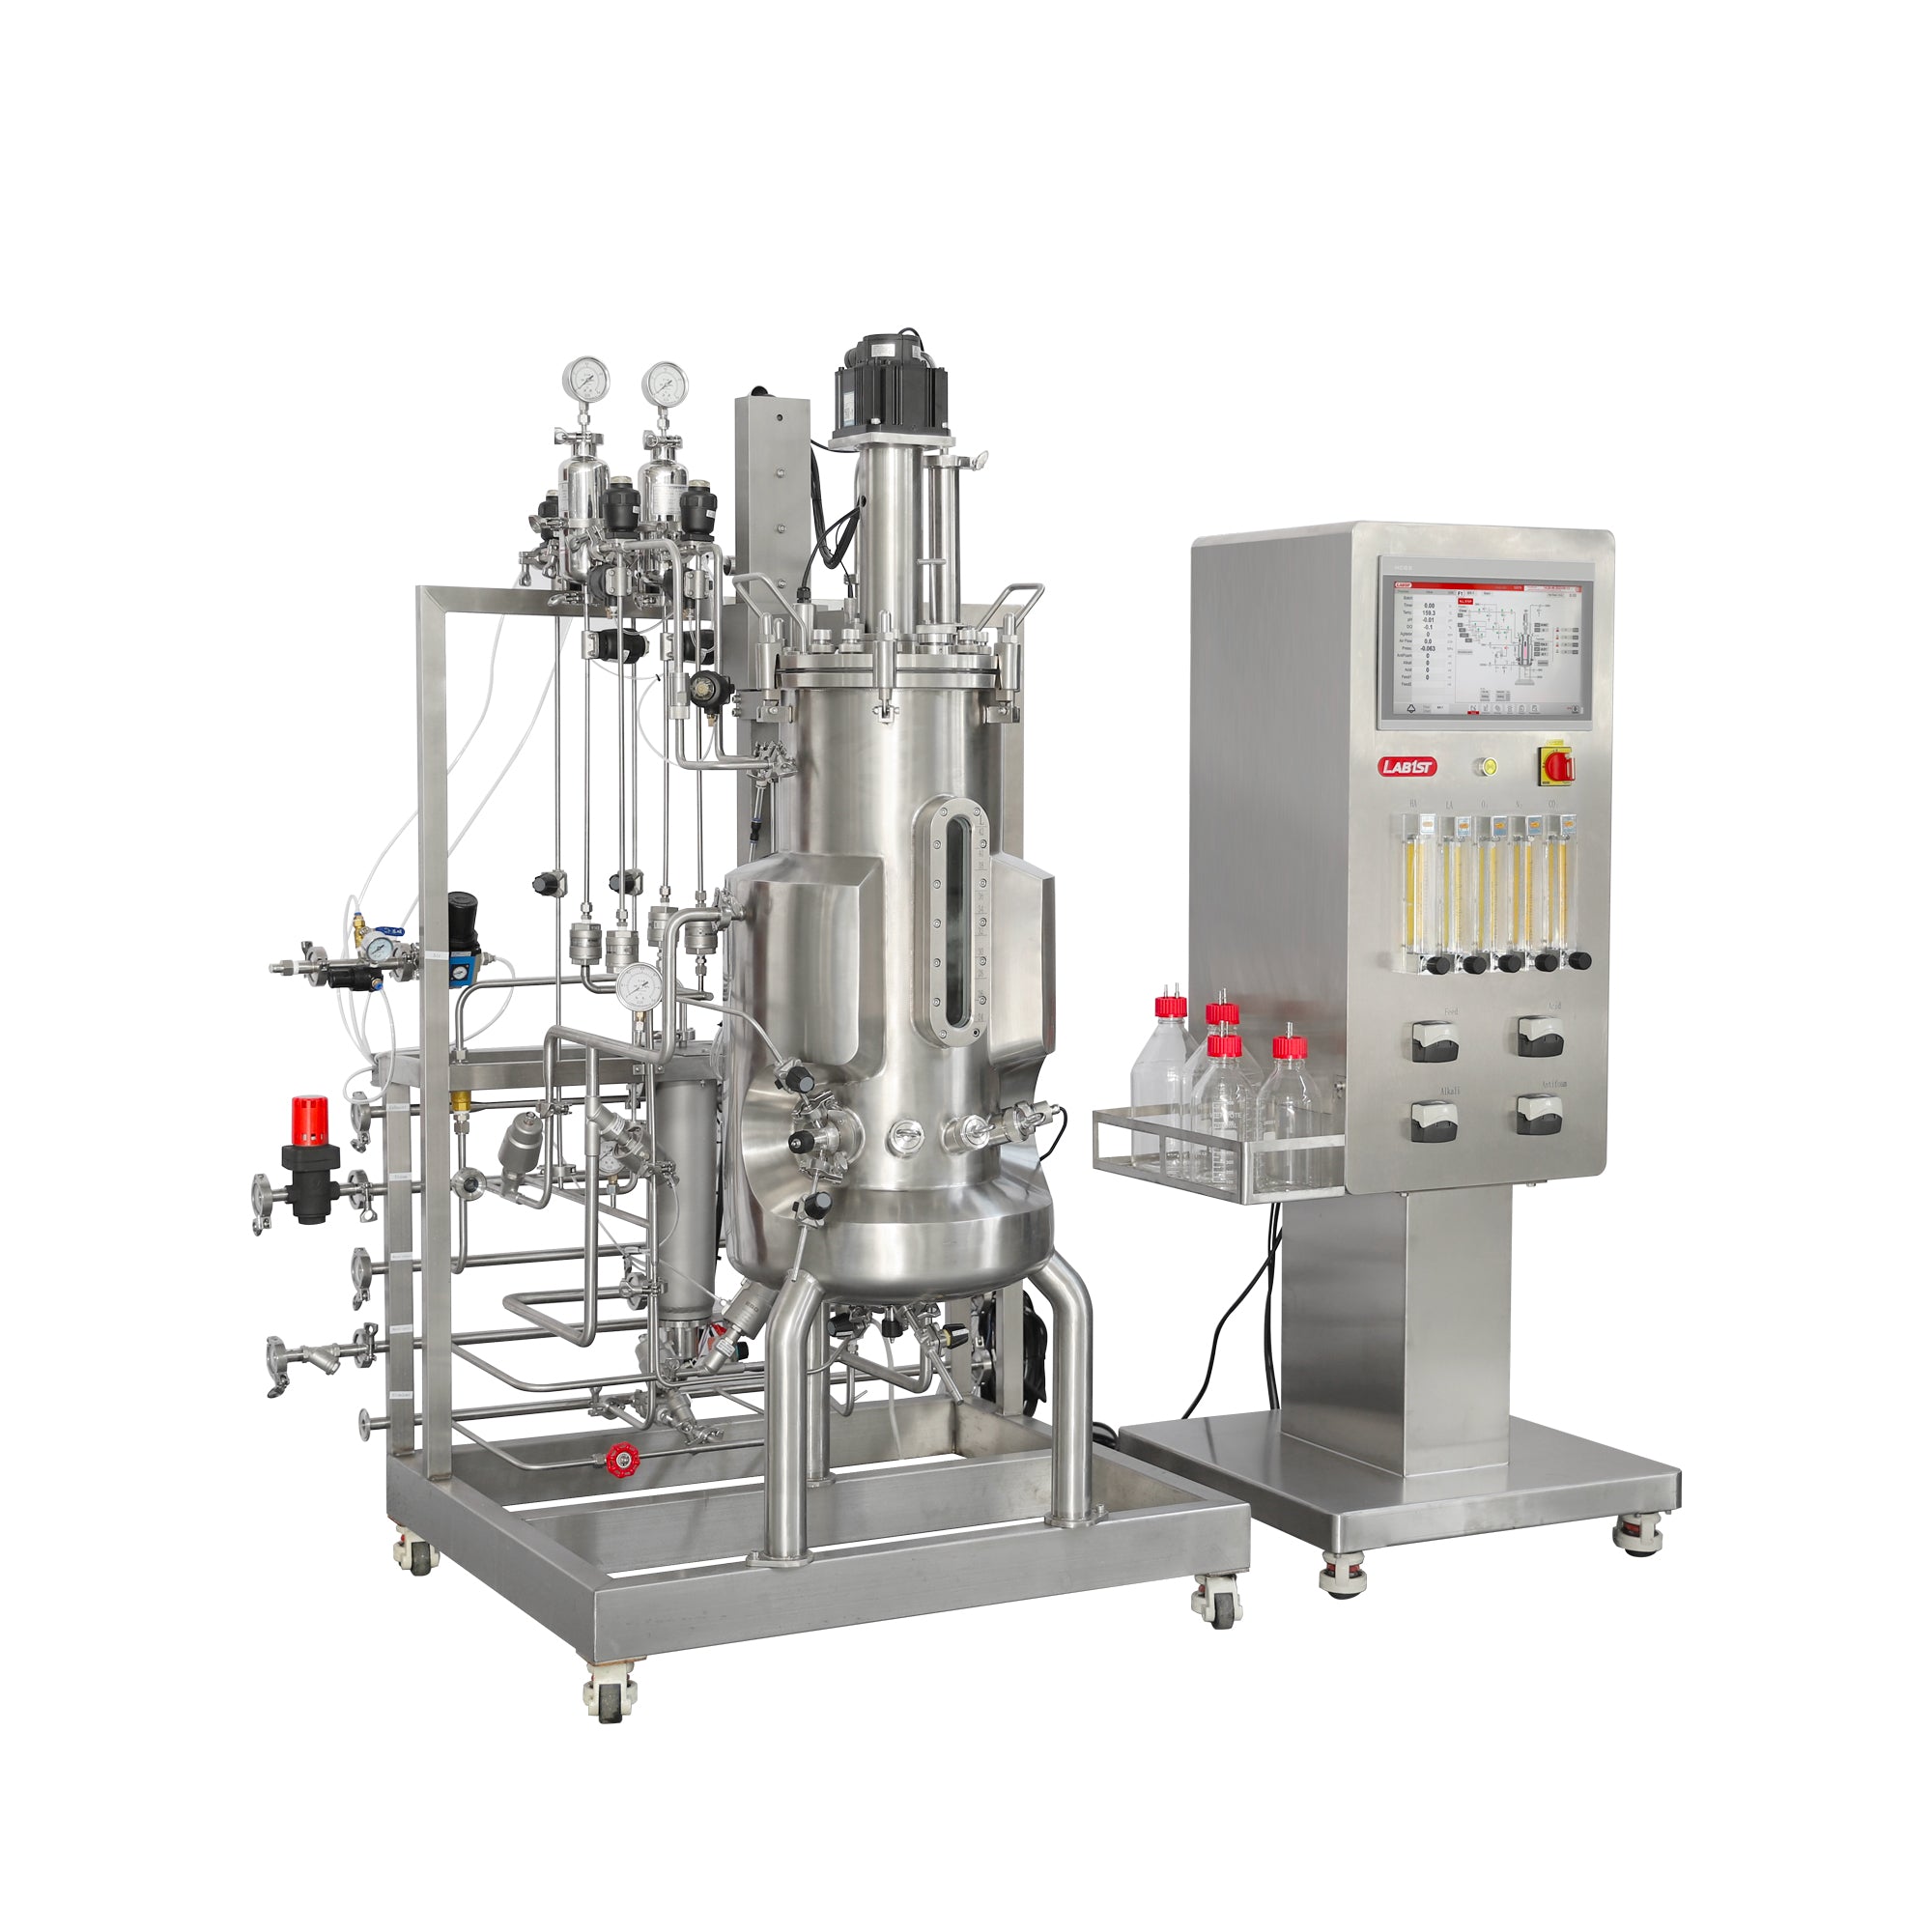 10L Stainless Steel Bioreactor for Microbial and Cell Culture BR500-C1